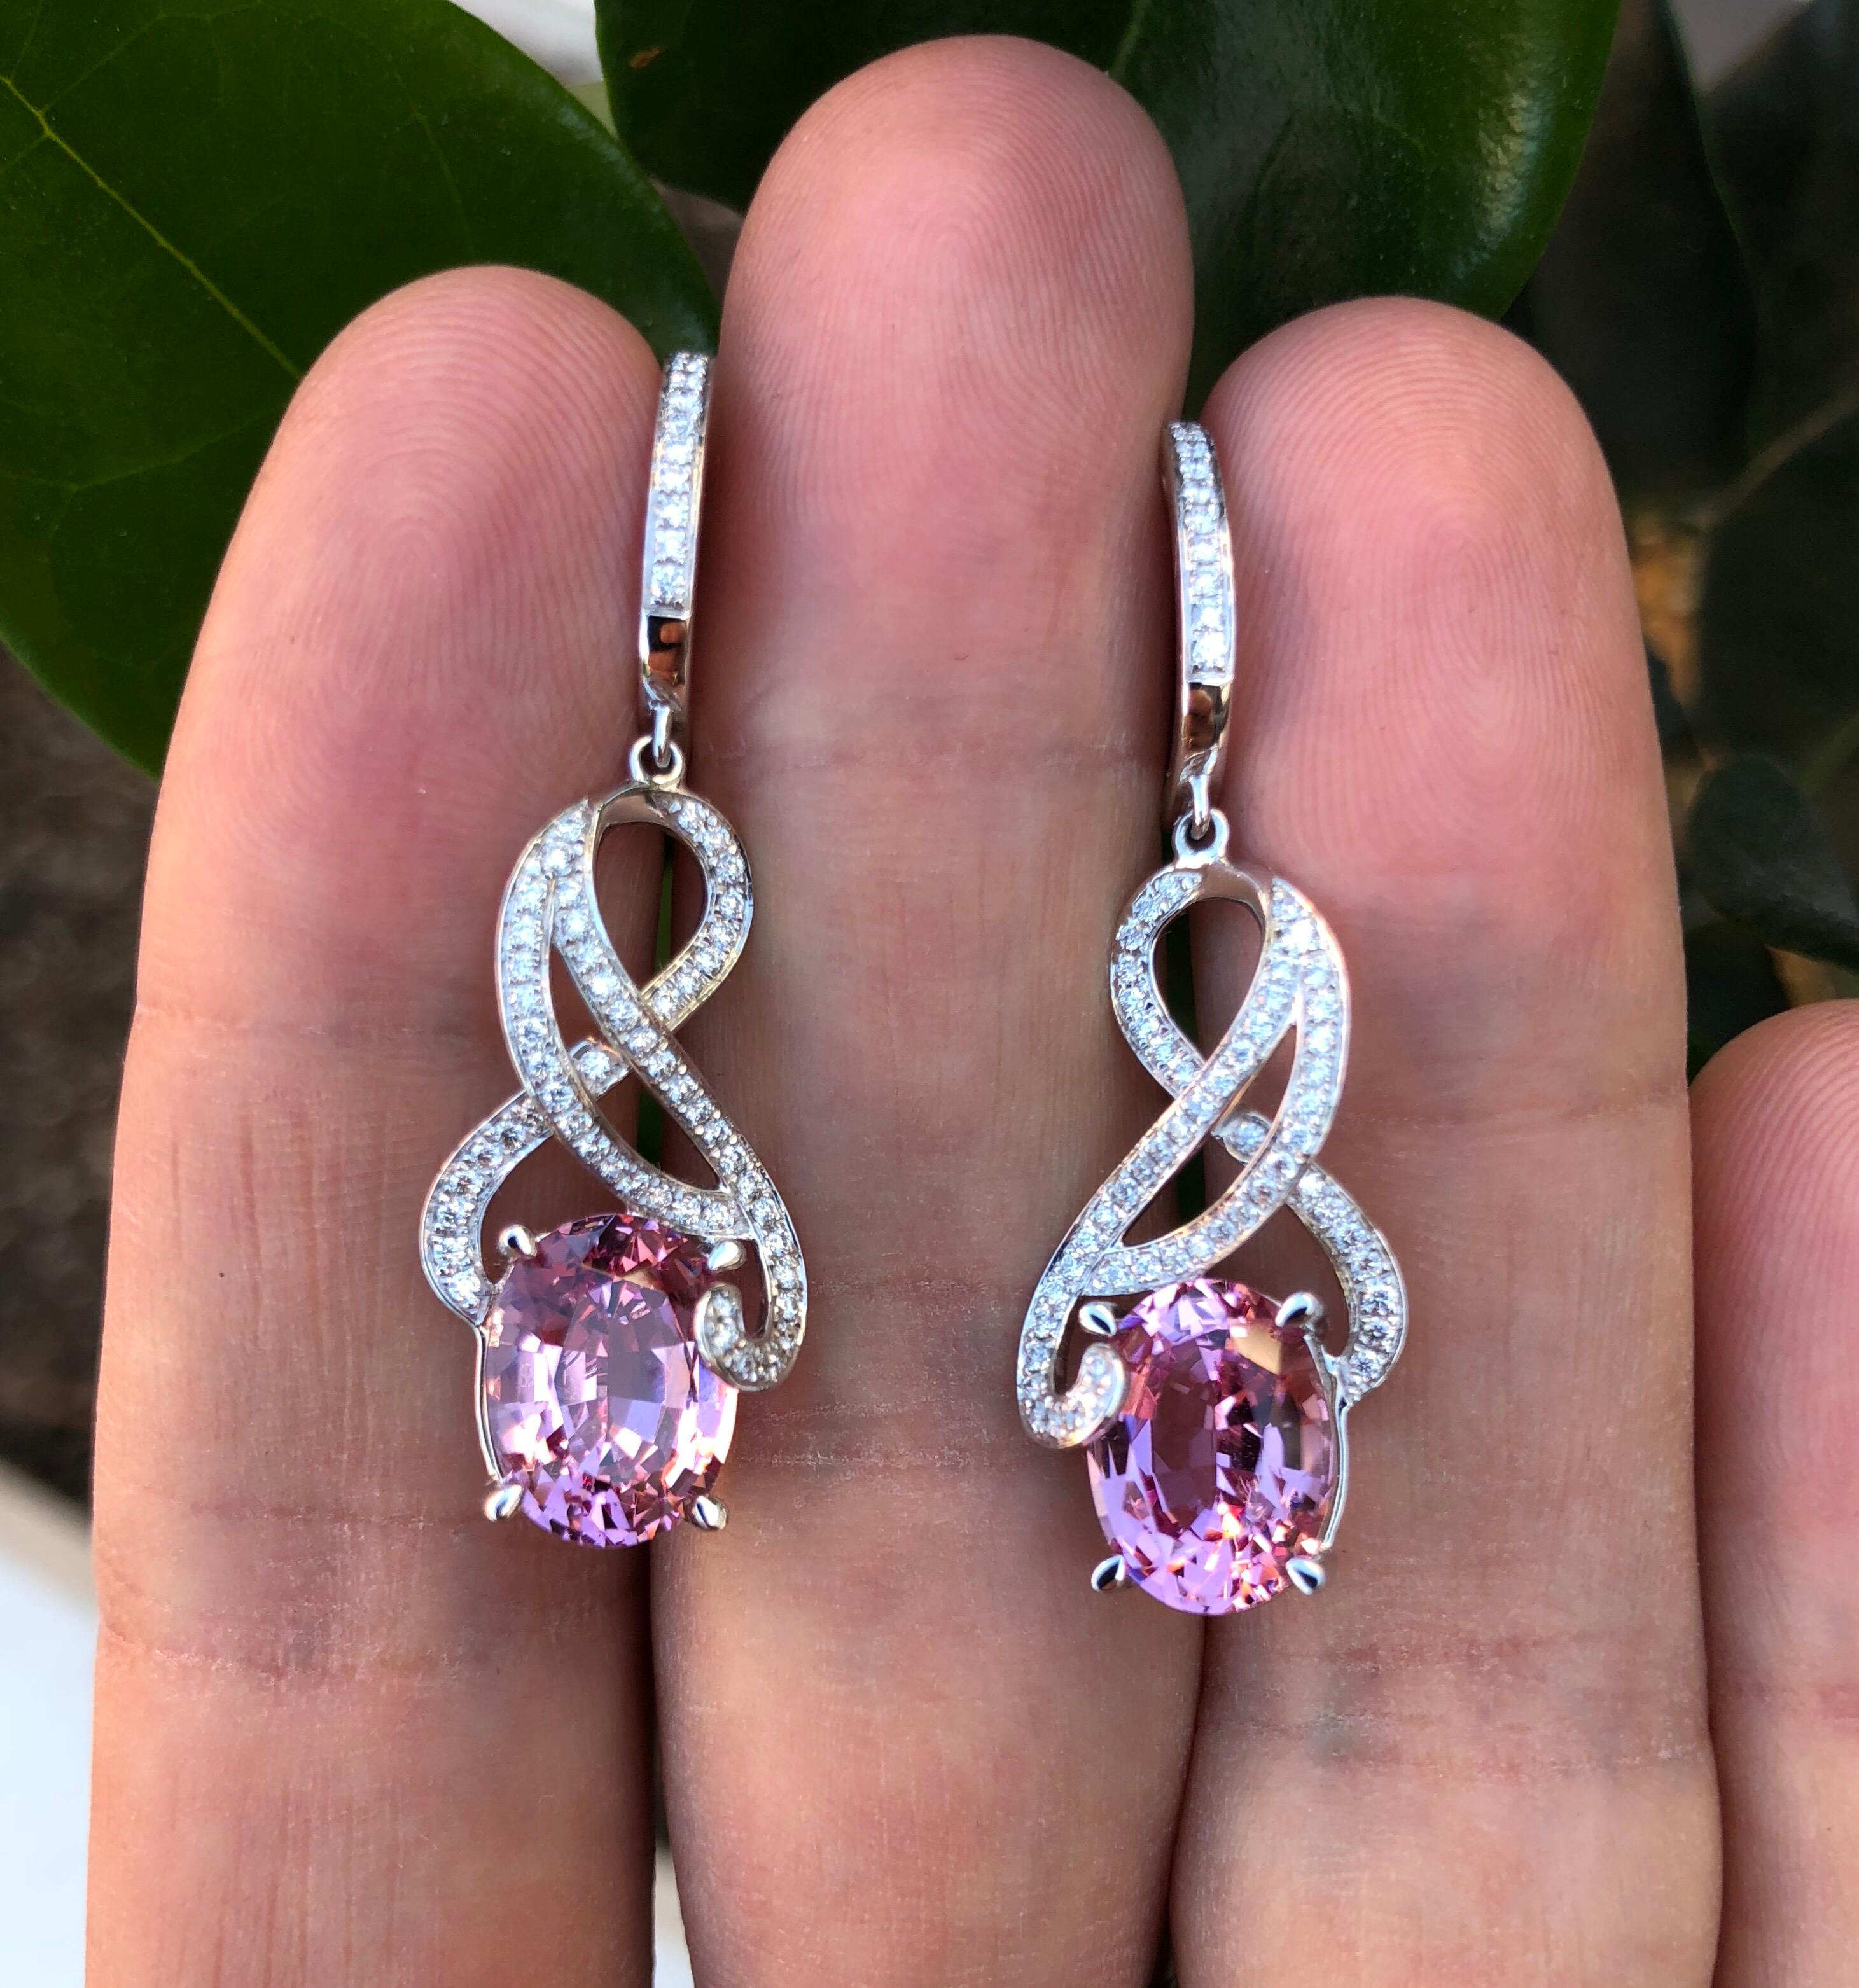 Pink Spinel earrings centering a pair of extra fine 7.00 carat ovals, accented by round brilliant diamonds weighing a total of 0.52 carats.
18K white gold earrings for women crafted by hand in the USA.
Length: 1.5 inches.
Returns are accepted and